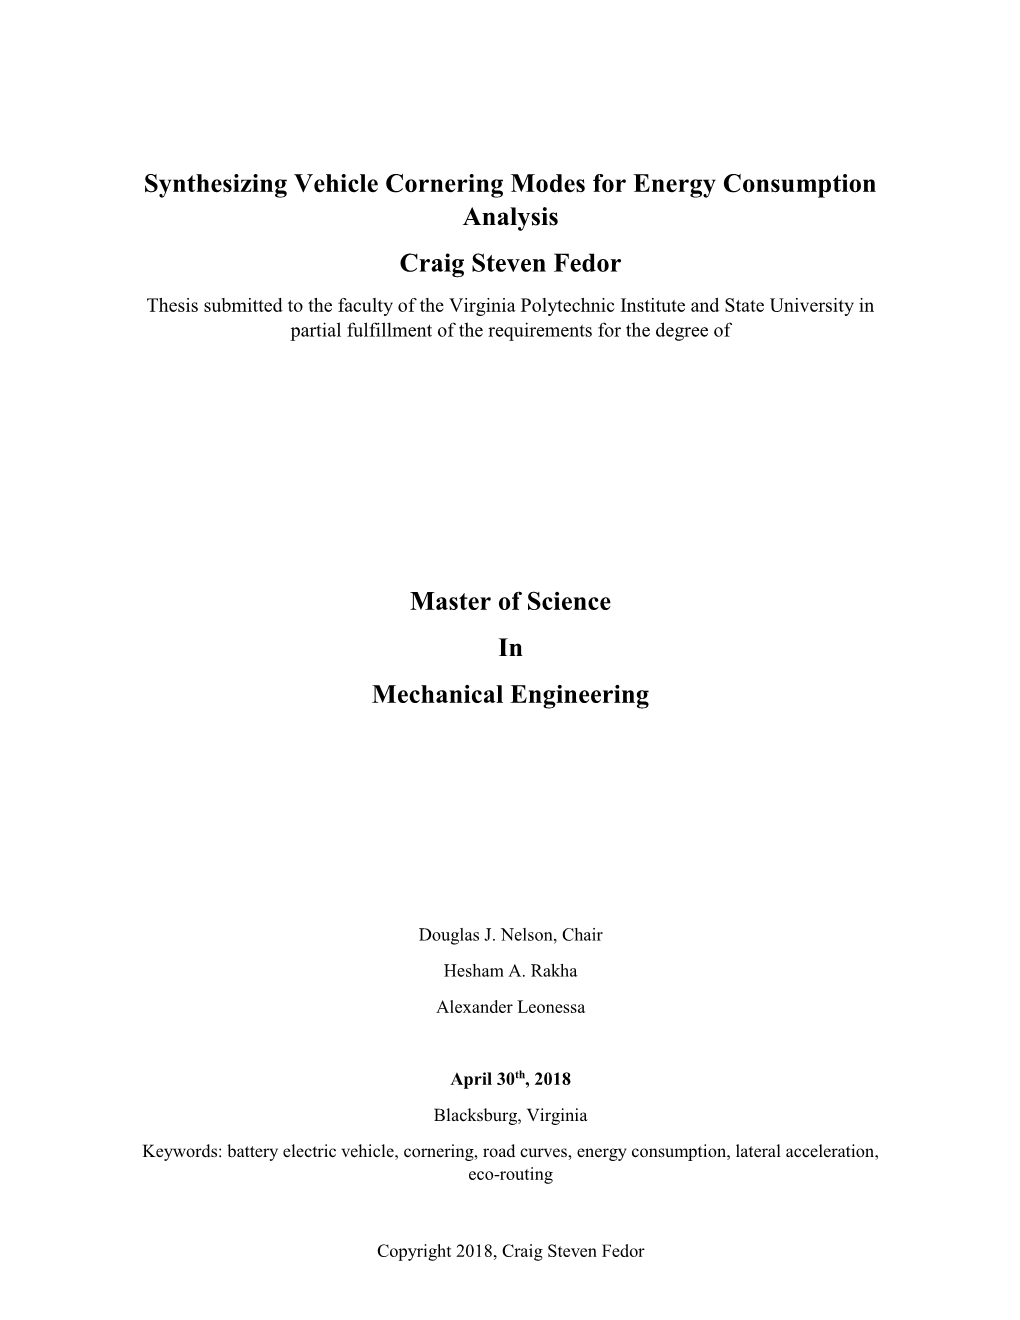 Synthesizing Vehicle Cornering Modes for Energy Consumption Analysis Craig Steven Fedor Master of Science in Mechanical Engineer